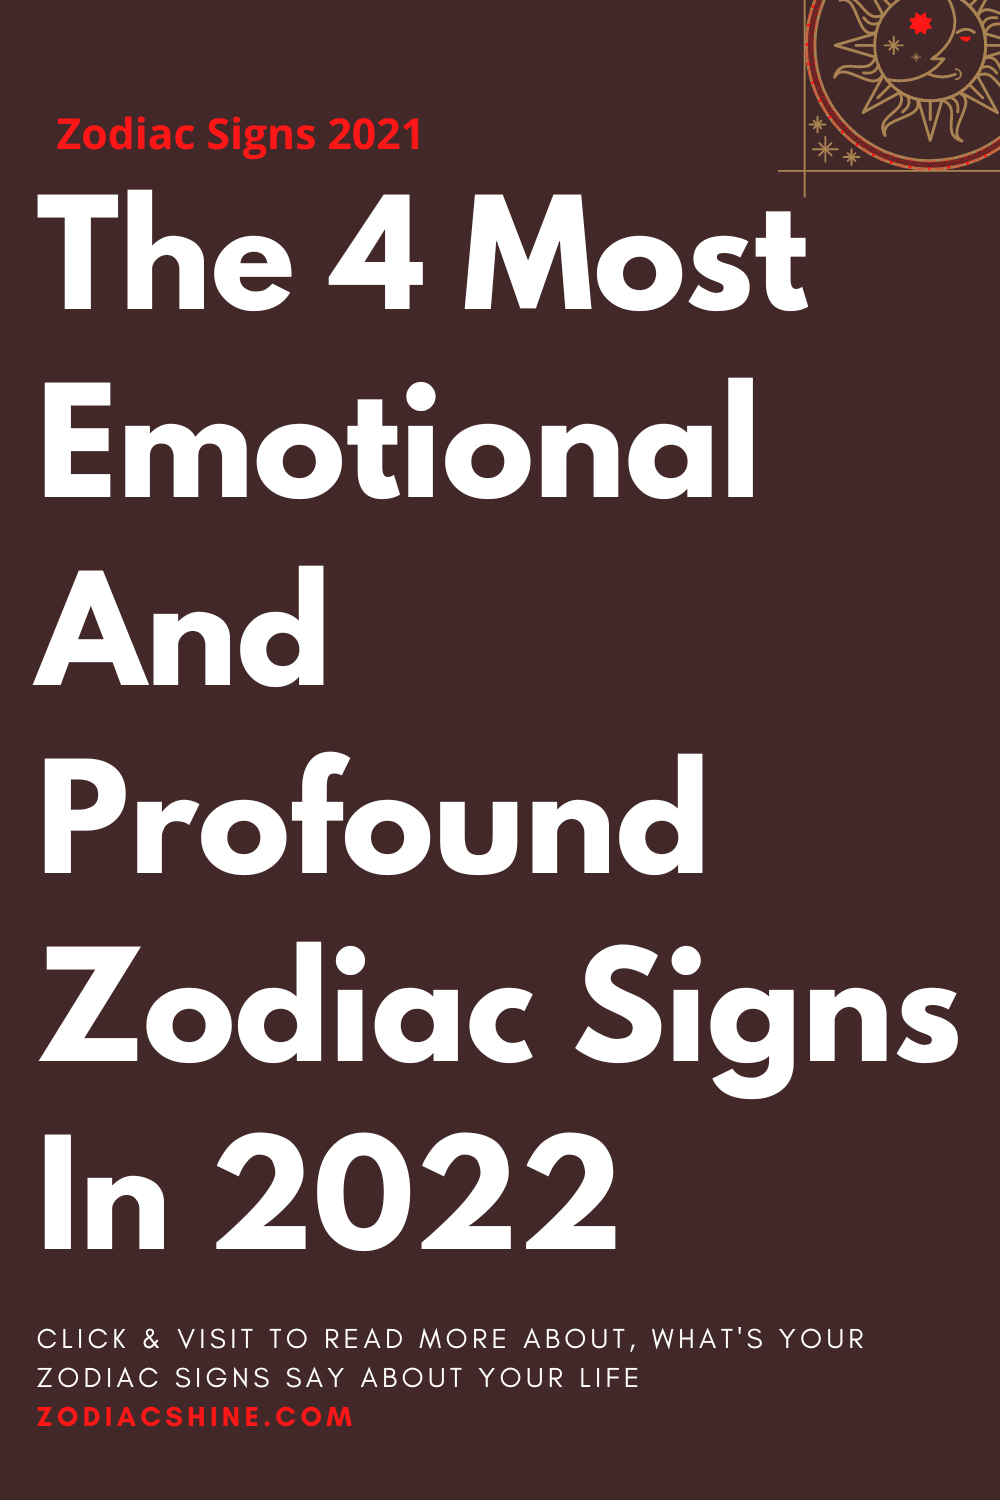 The 4 Most Emotional And Profound Zodiac Signs In 2022